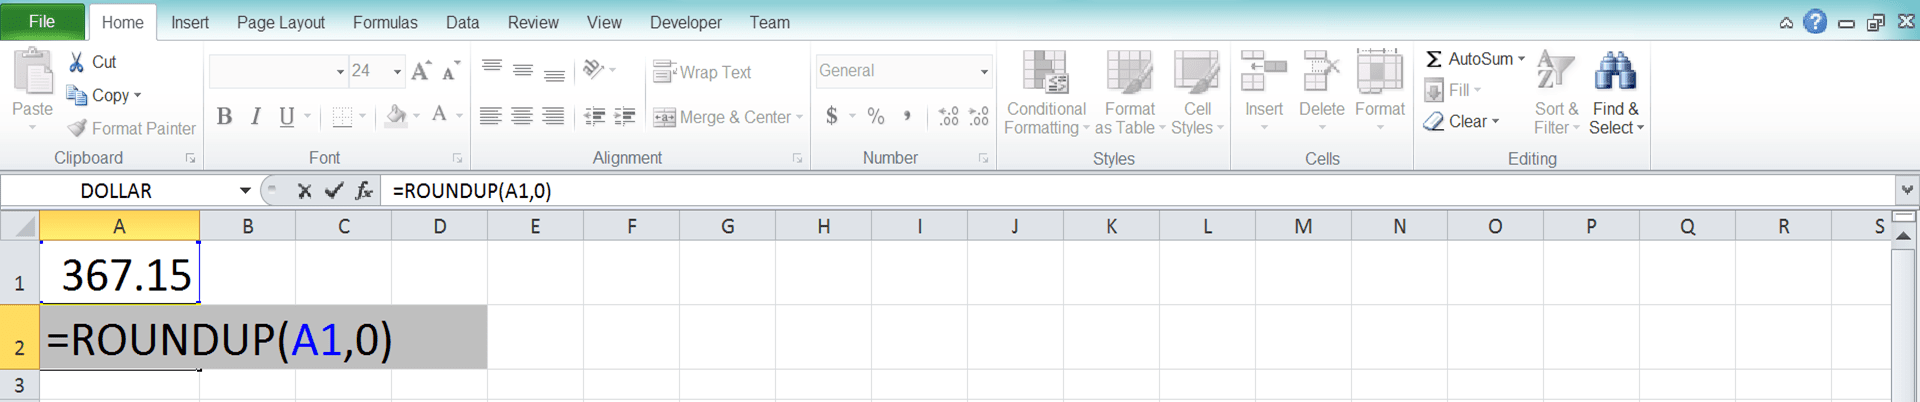 Excel ROUNDUP Formula: Functions, Examples, and How to Use - Screenshot of Step 5